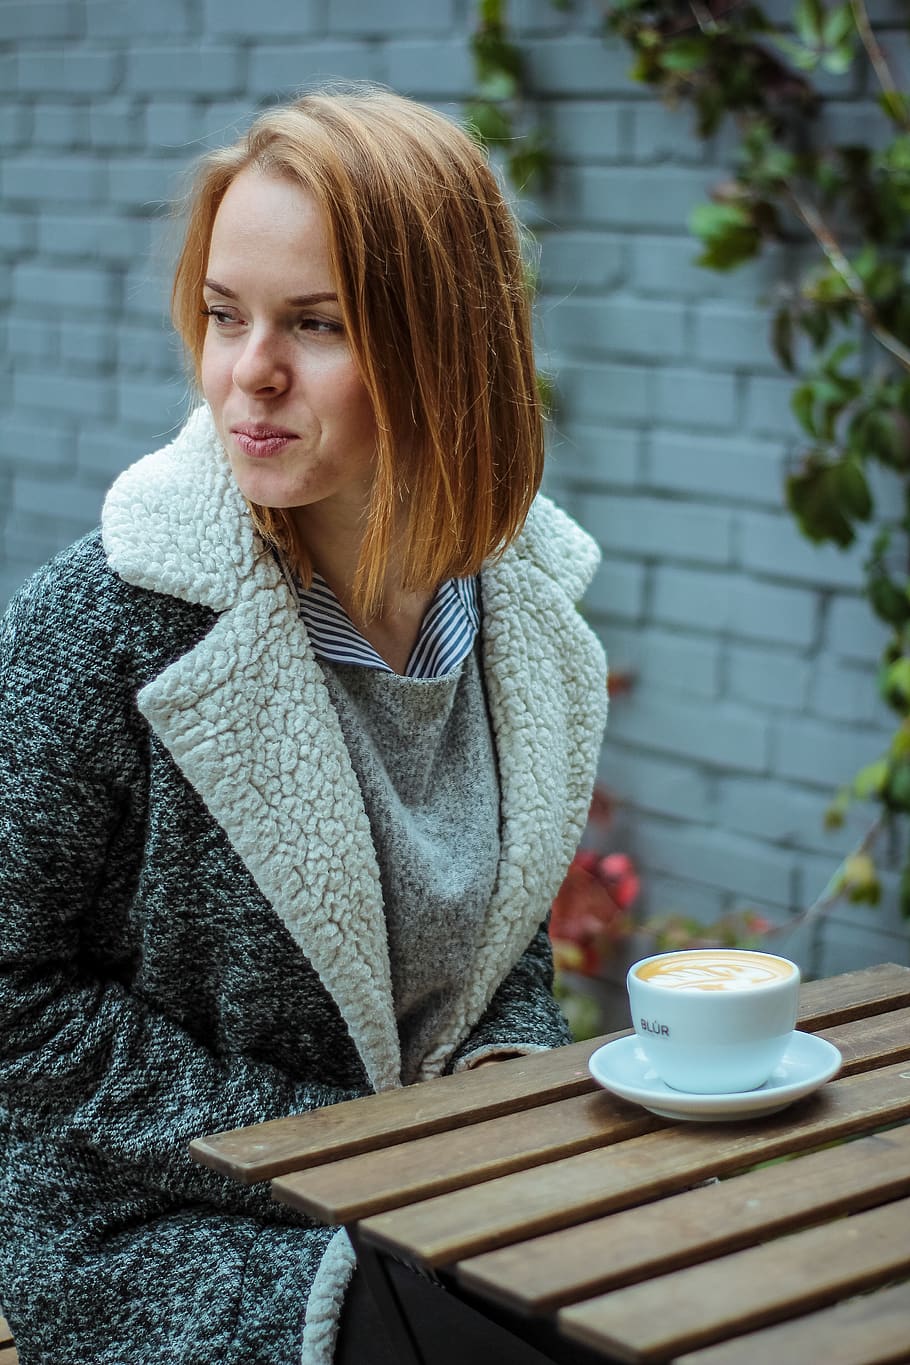 Woman Wearing Gray Coat in Front of Brown Table With White Coffee Cup